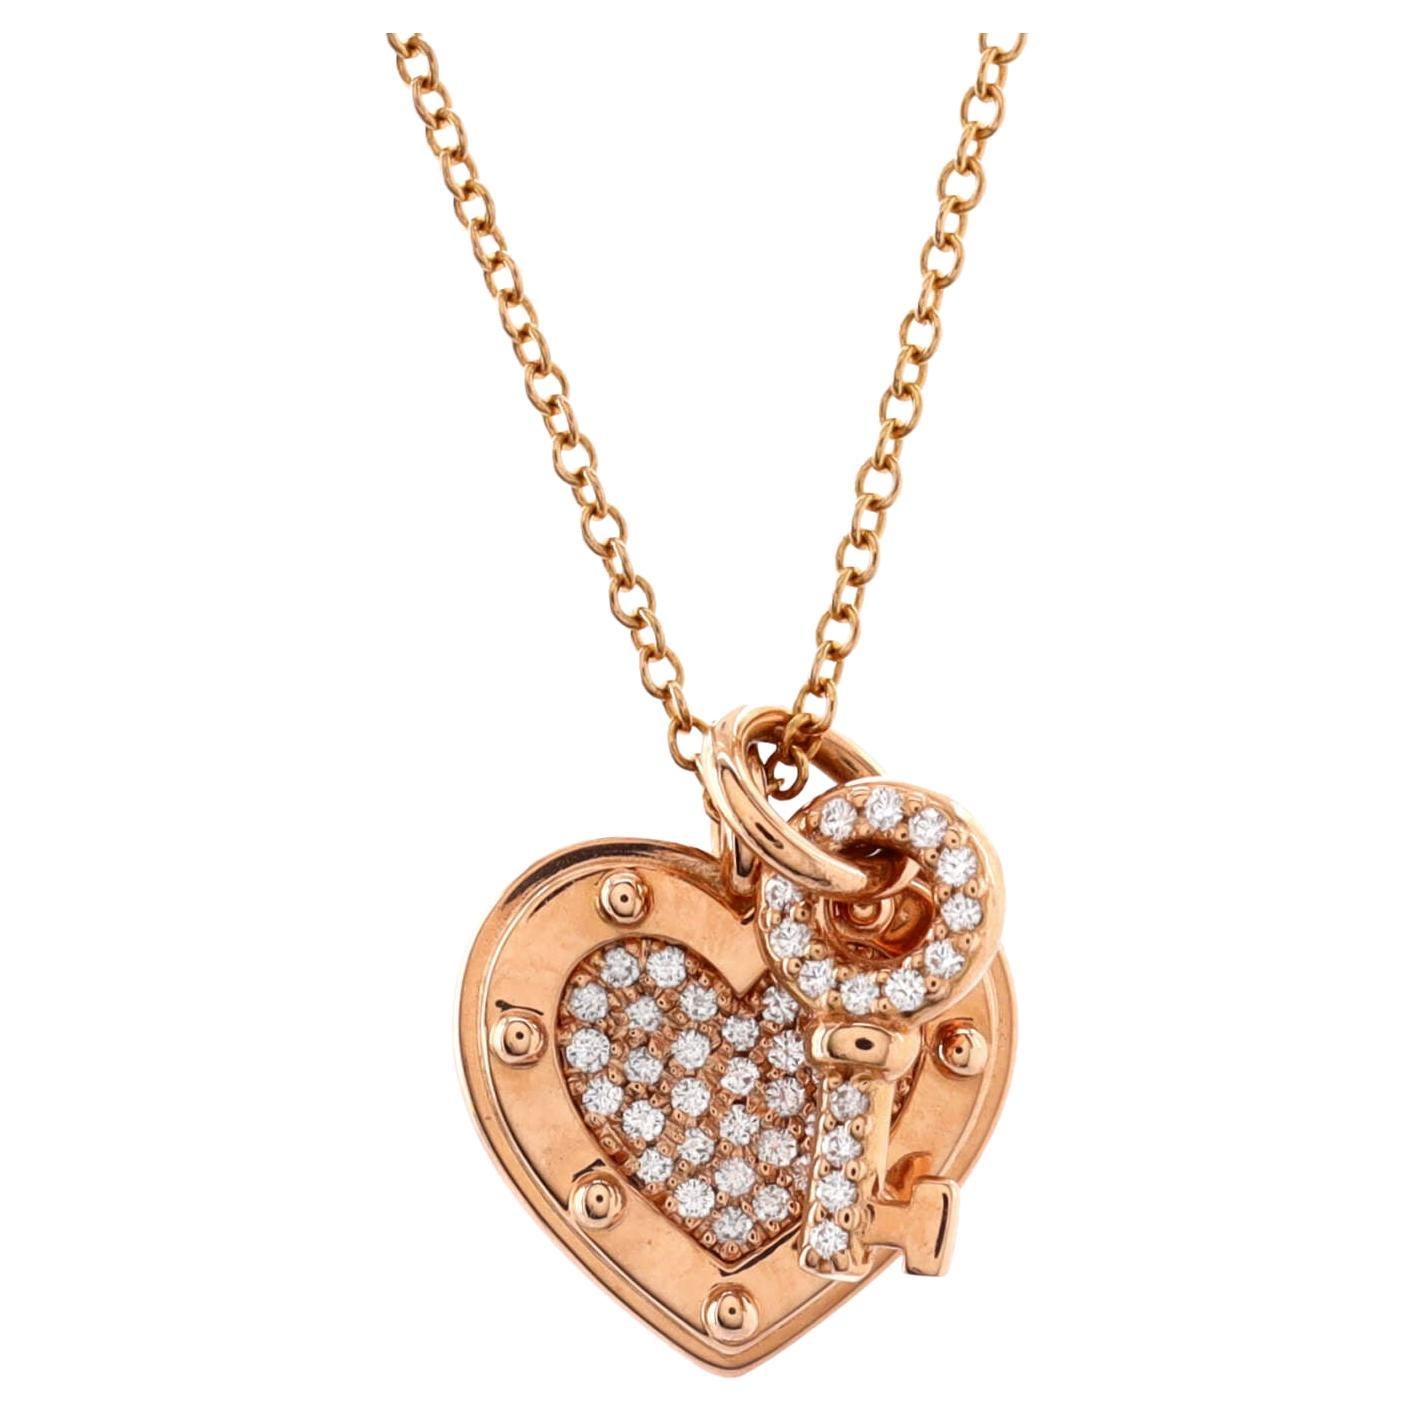 Tiffany & Co Love Heart Tag Key Pendant Necklace 18k Rose Gold with Diamonds